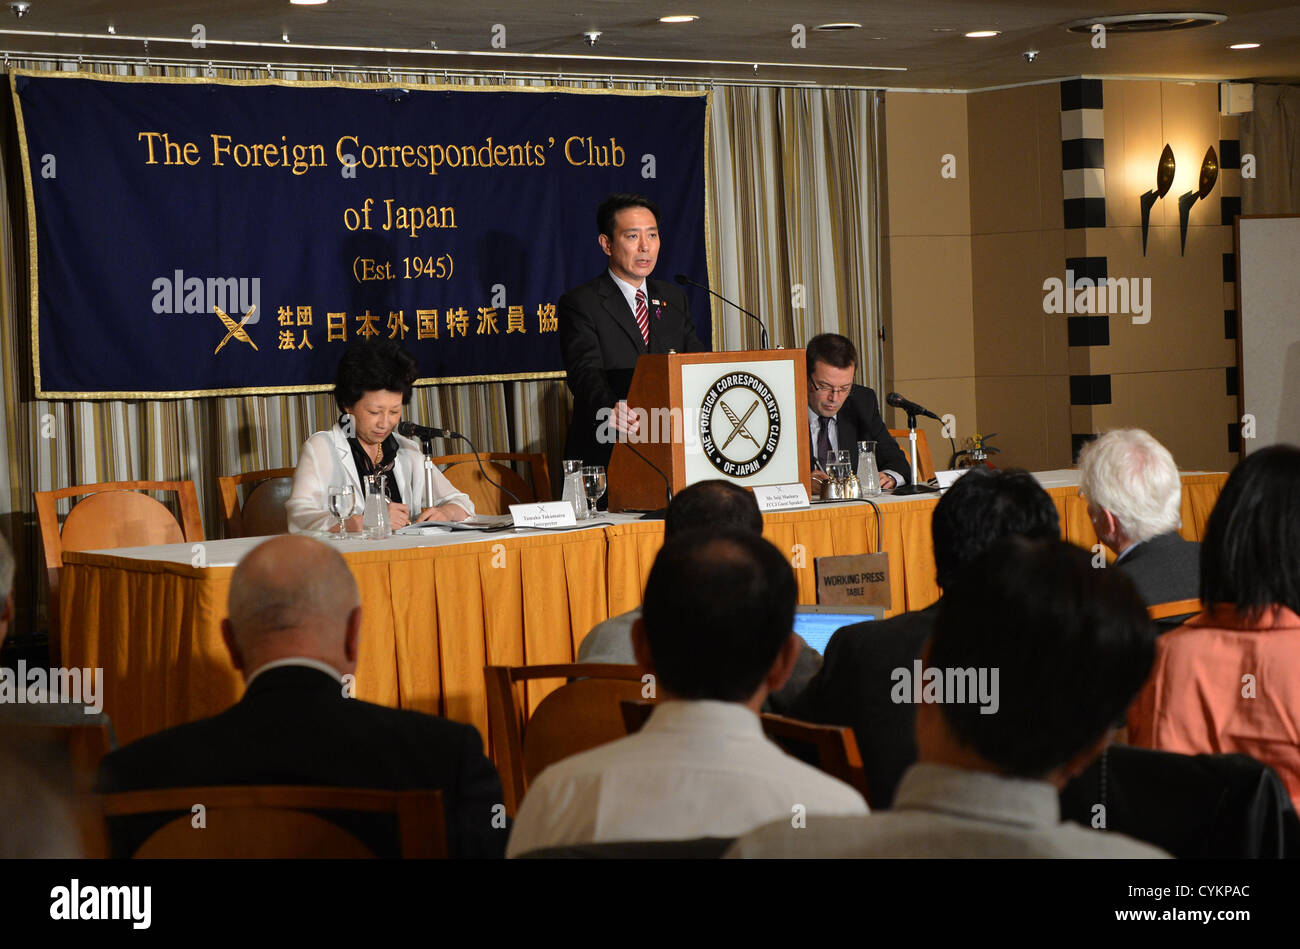 November 7, 2012, Tokyo, Japan - Japan's Economics Minister Seiji Maehara speaks during a news conference at Tokyo's Foreign Correspondents' Club of Japan on Wednesday, November 7, 2012. Maehara said Japan's economic situation needs powerful monetary easing in its fight against deflation.  (Photo by Natsuki Sakai/AFLO) AYF -mis- Stock Photo